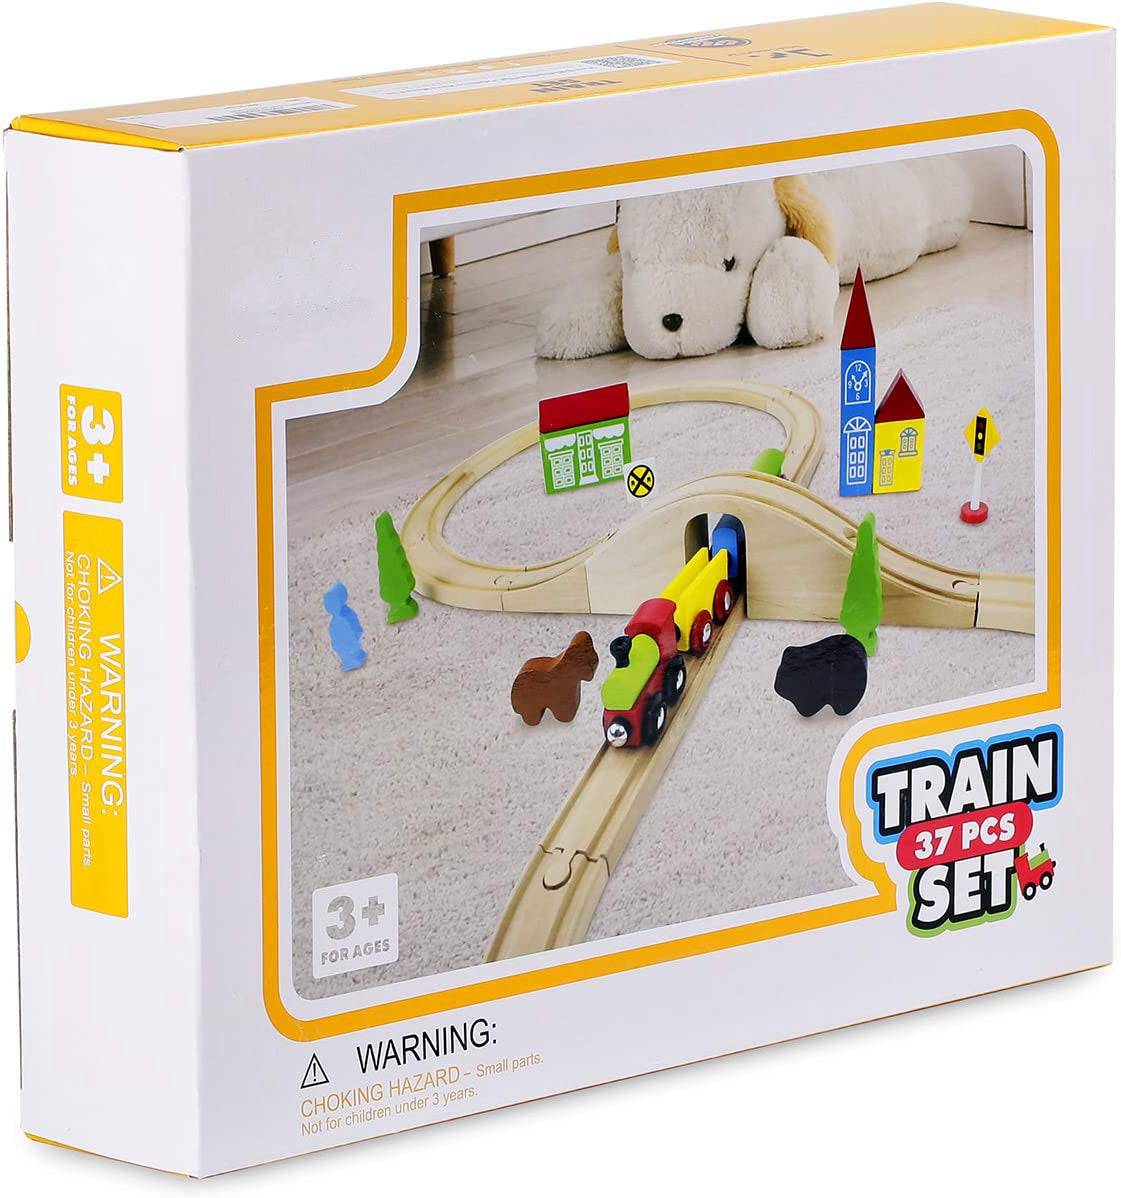 Onekey Wooden Train Set for Toddler with Double-Side Train Tracks Fits Brio, Thomas, Melissa and Doug, Kids Wood Toy Train for 3,4,5 Year old Boys and Girls